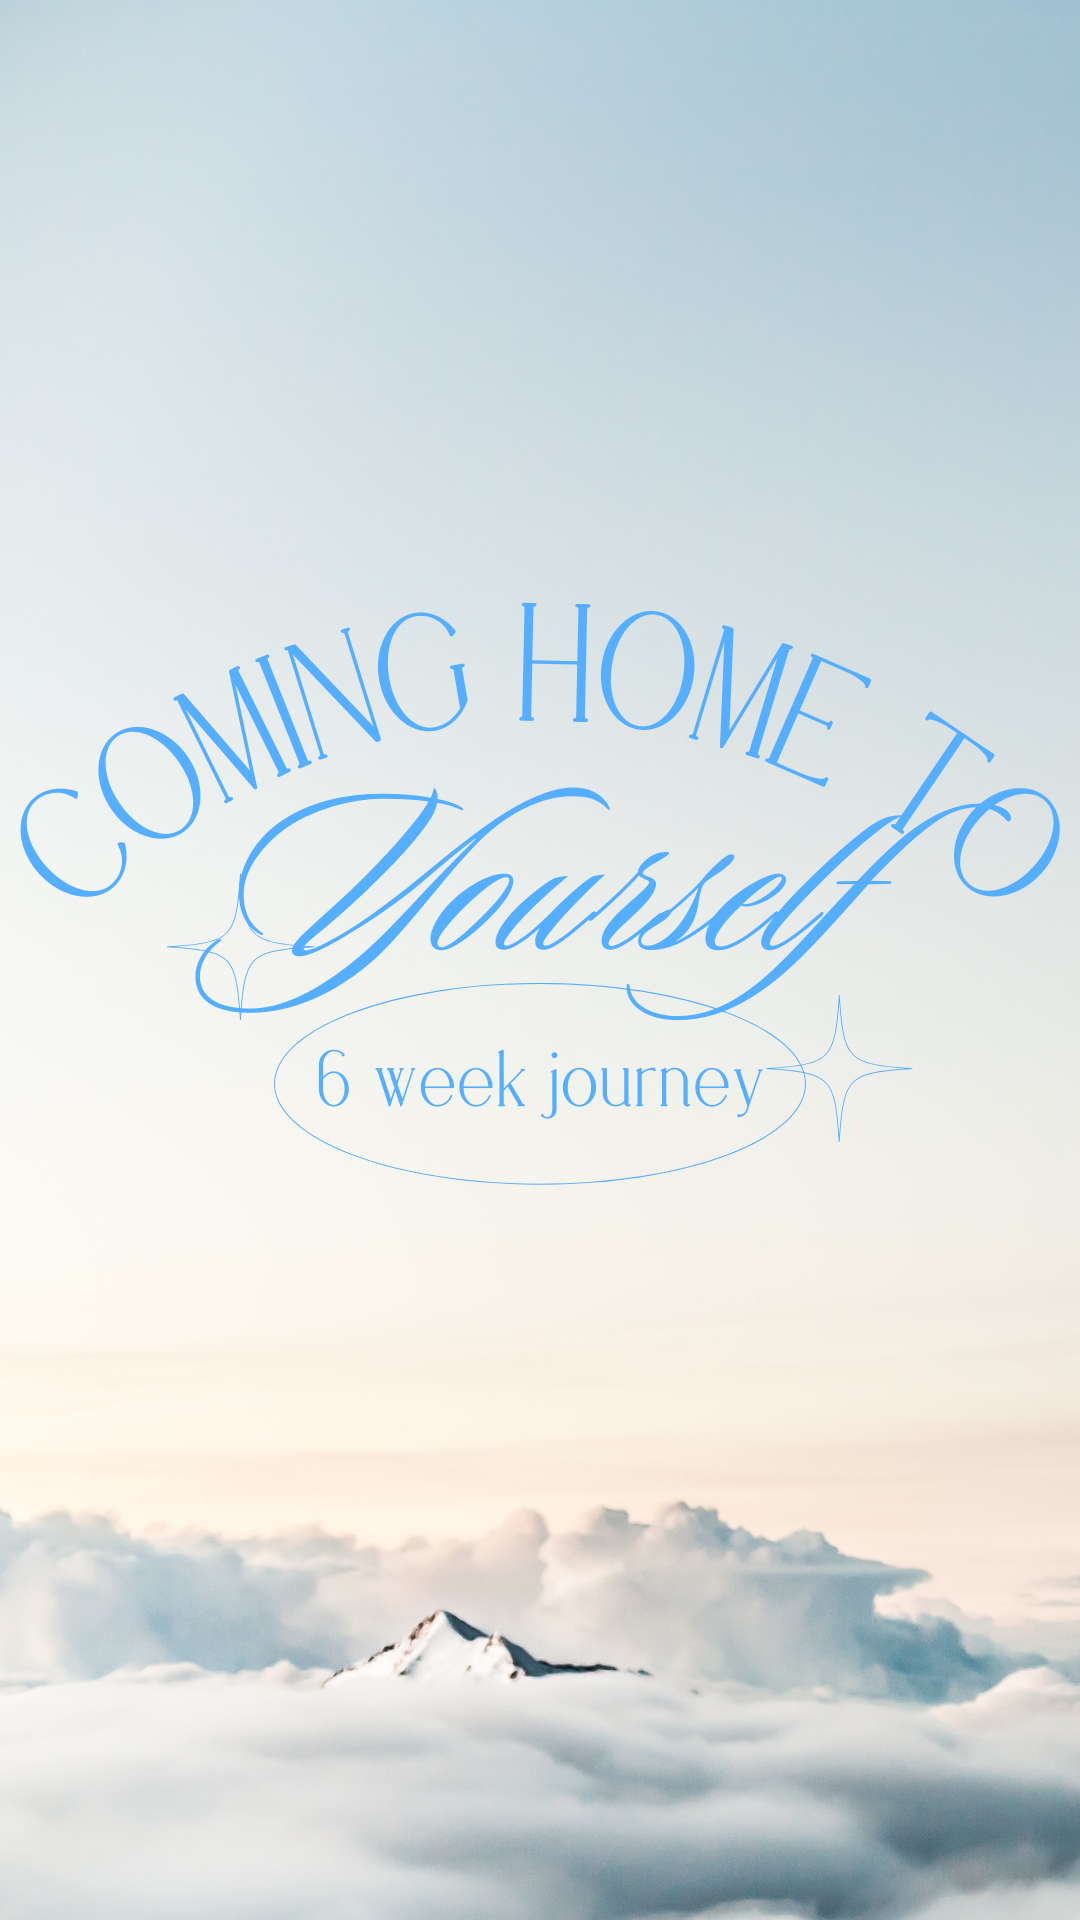 6 Week Journey - Coming Home to Yourself